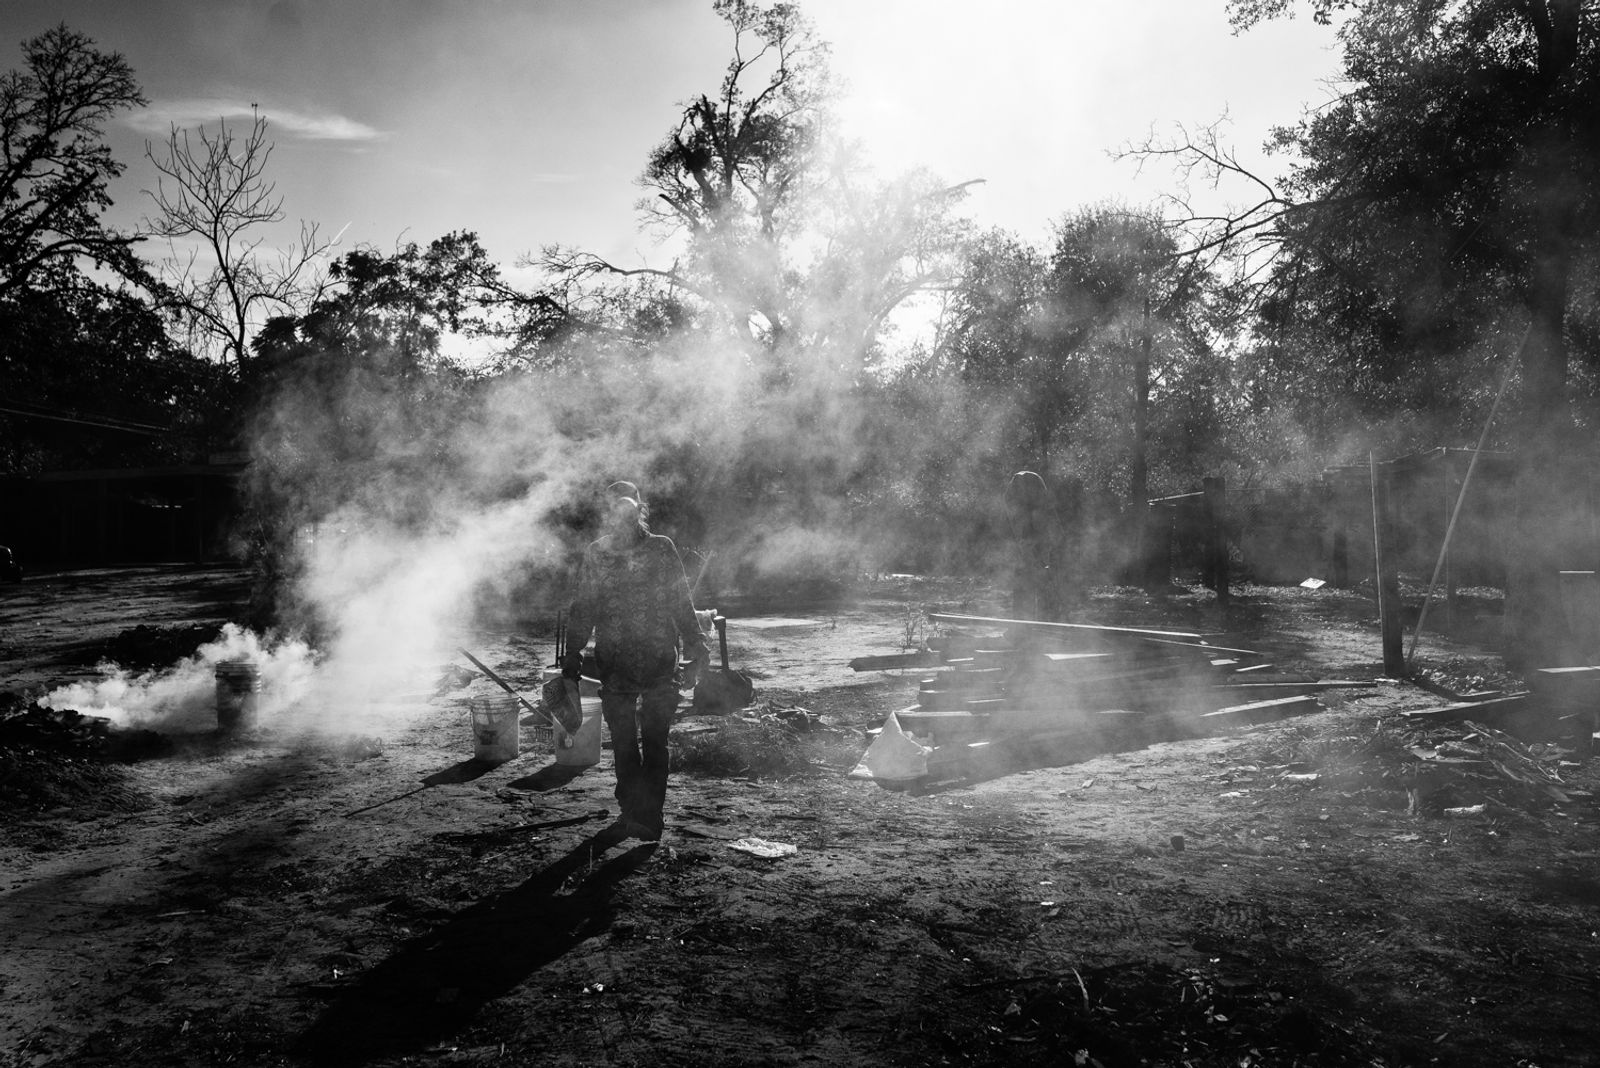 © Richard Sharum - A man burns a horse carcass that was dumped in the community overnight. 2019.